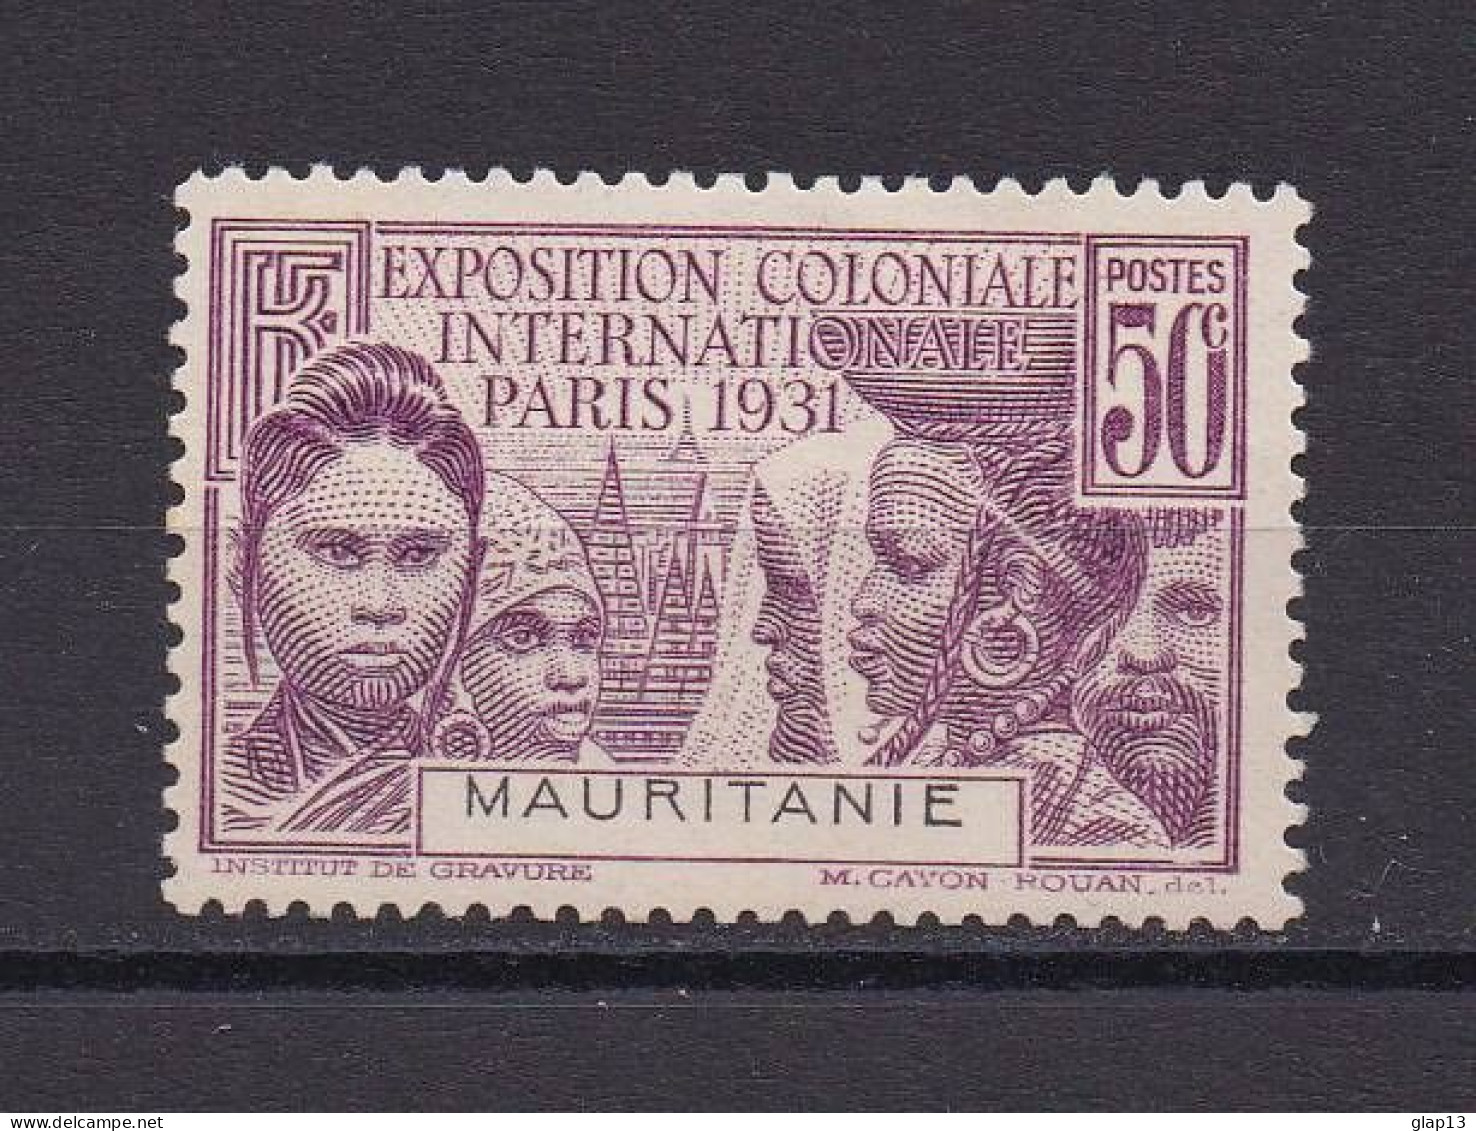 MAURITANIE 1931 TIMBRE N°63 NEUF AVEC CHARNIERE EXPOSITION - Unused Stamps